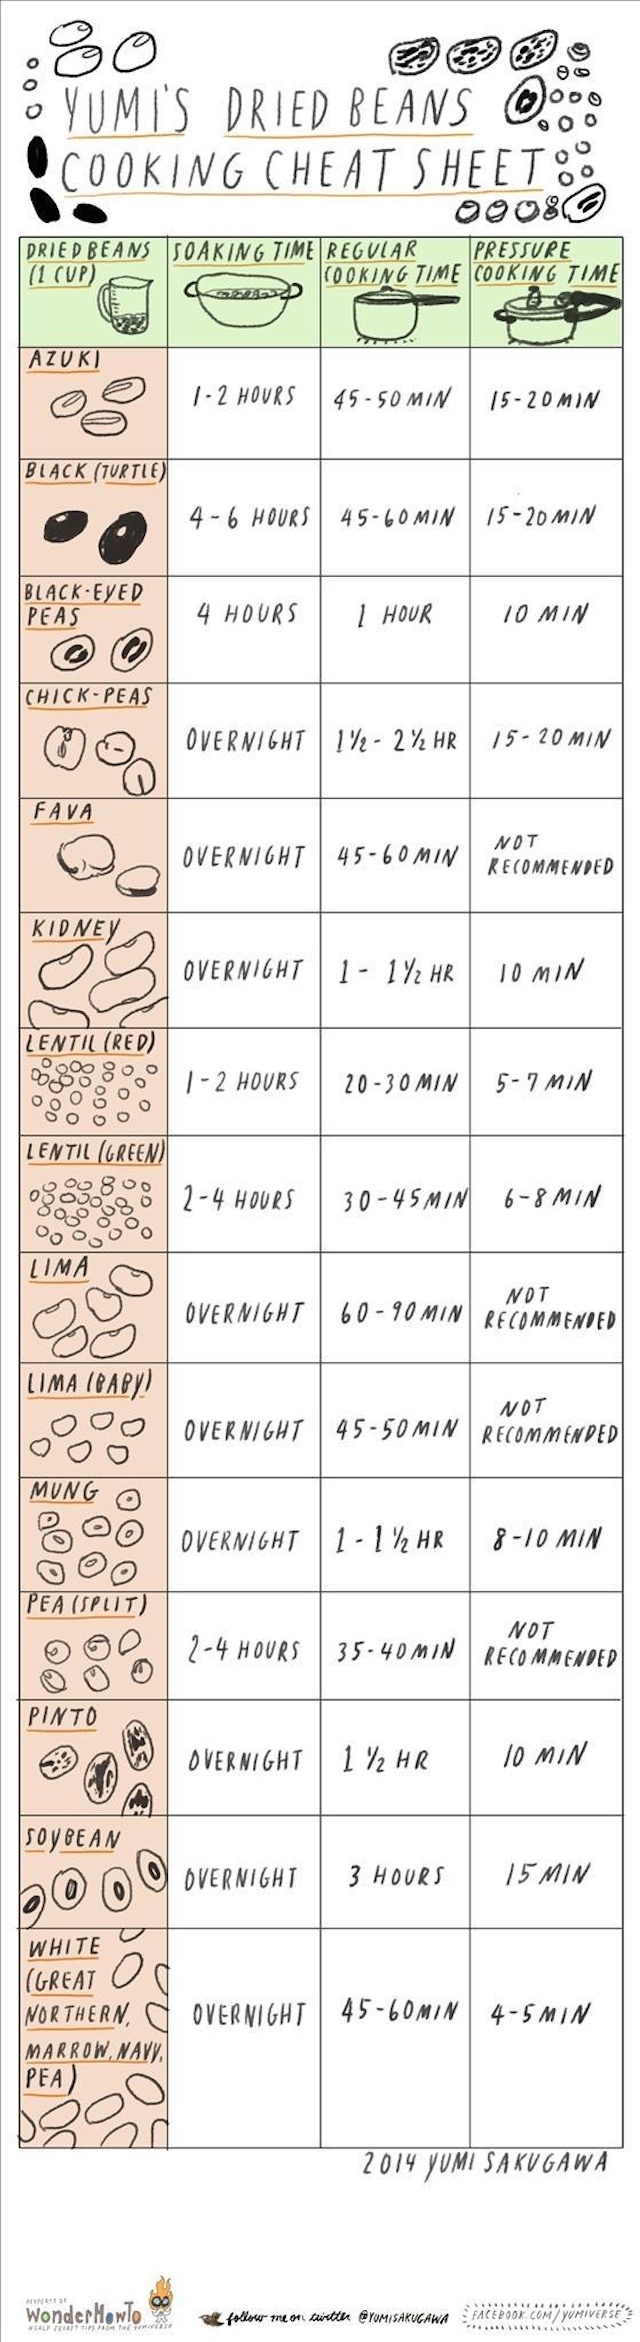 This Cheat Sheet Shows You The Right Soaking Times For Dried Beans